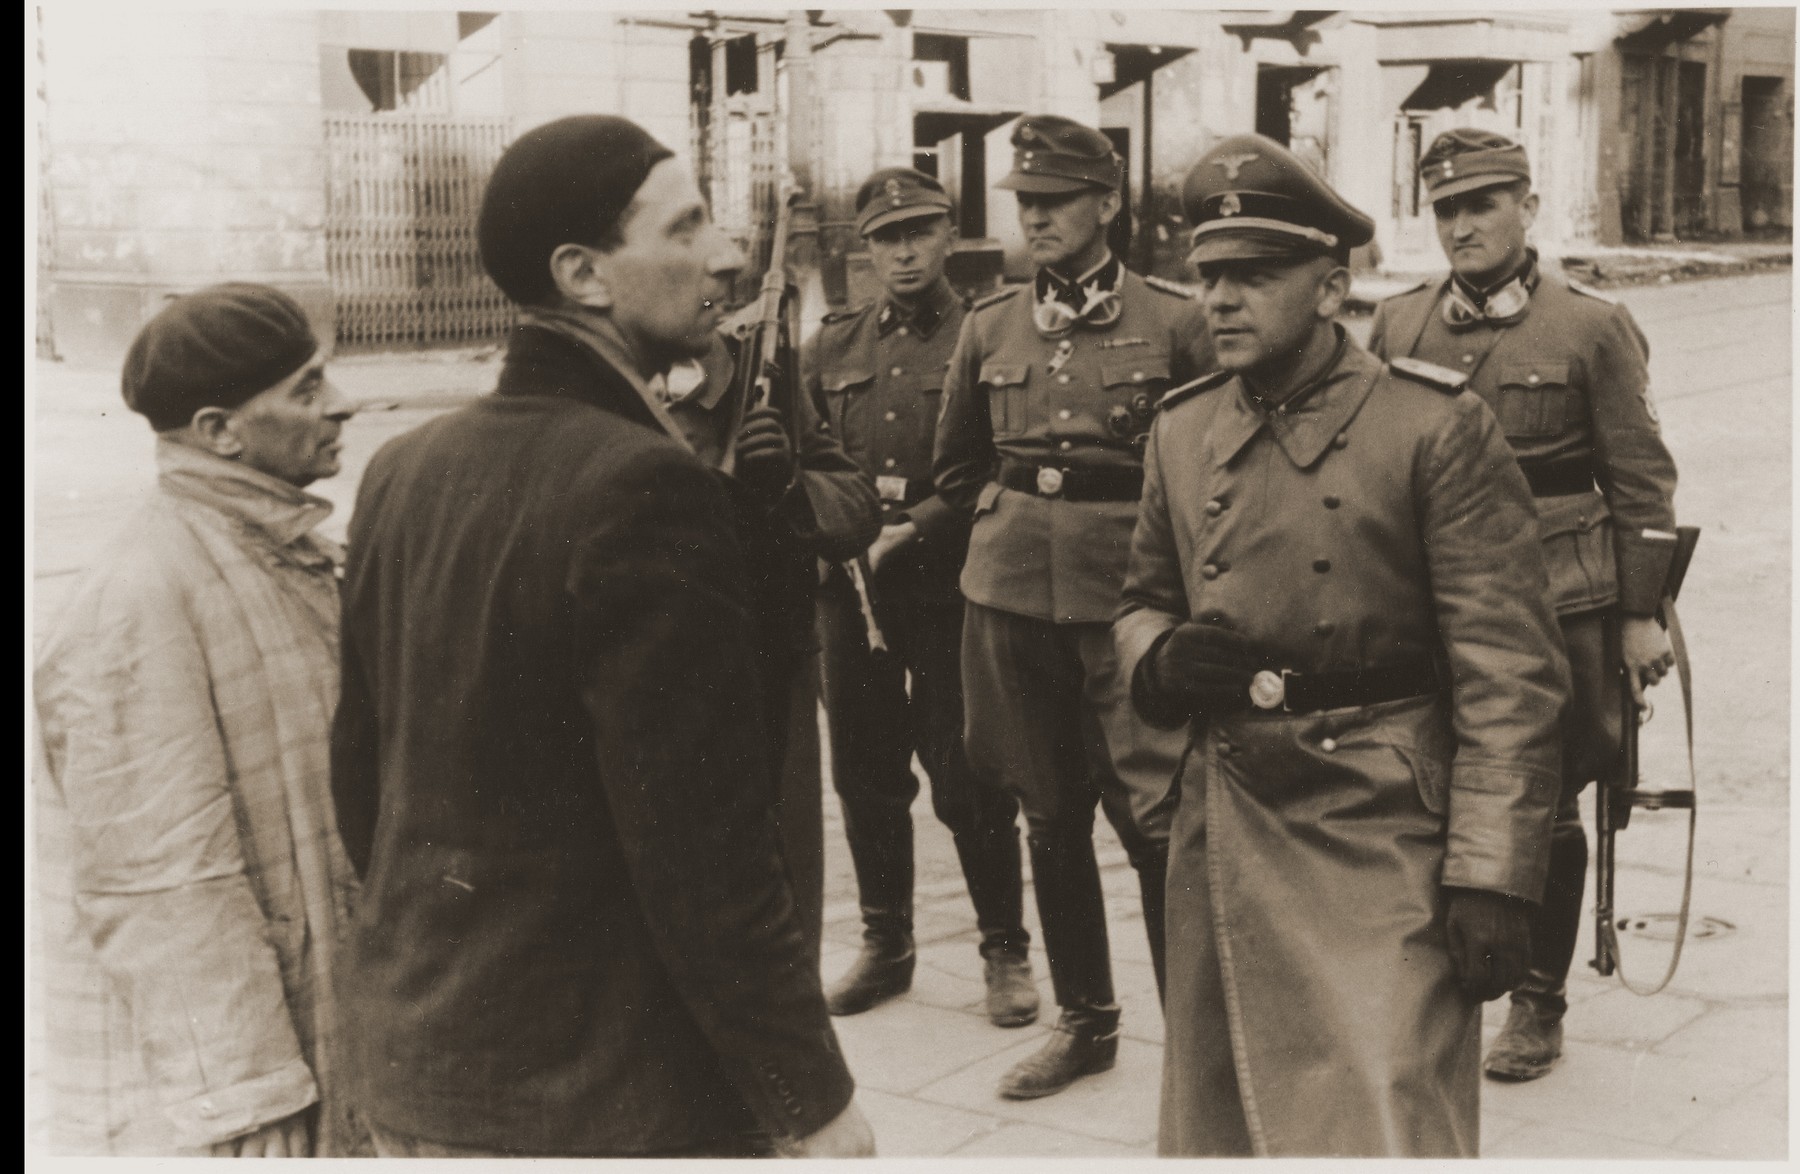 An SS officer questions two Jewish resistance fighters during the suppression of the Warsaw ghetto uprising, as SS-Brigadefuehrer Juergen Stroop (rear, center) and his security detail look on.

The original caption (translated from German) reads: "Jewish traitors."